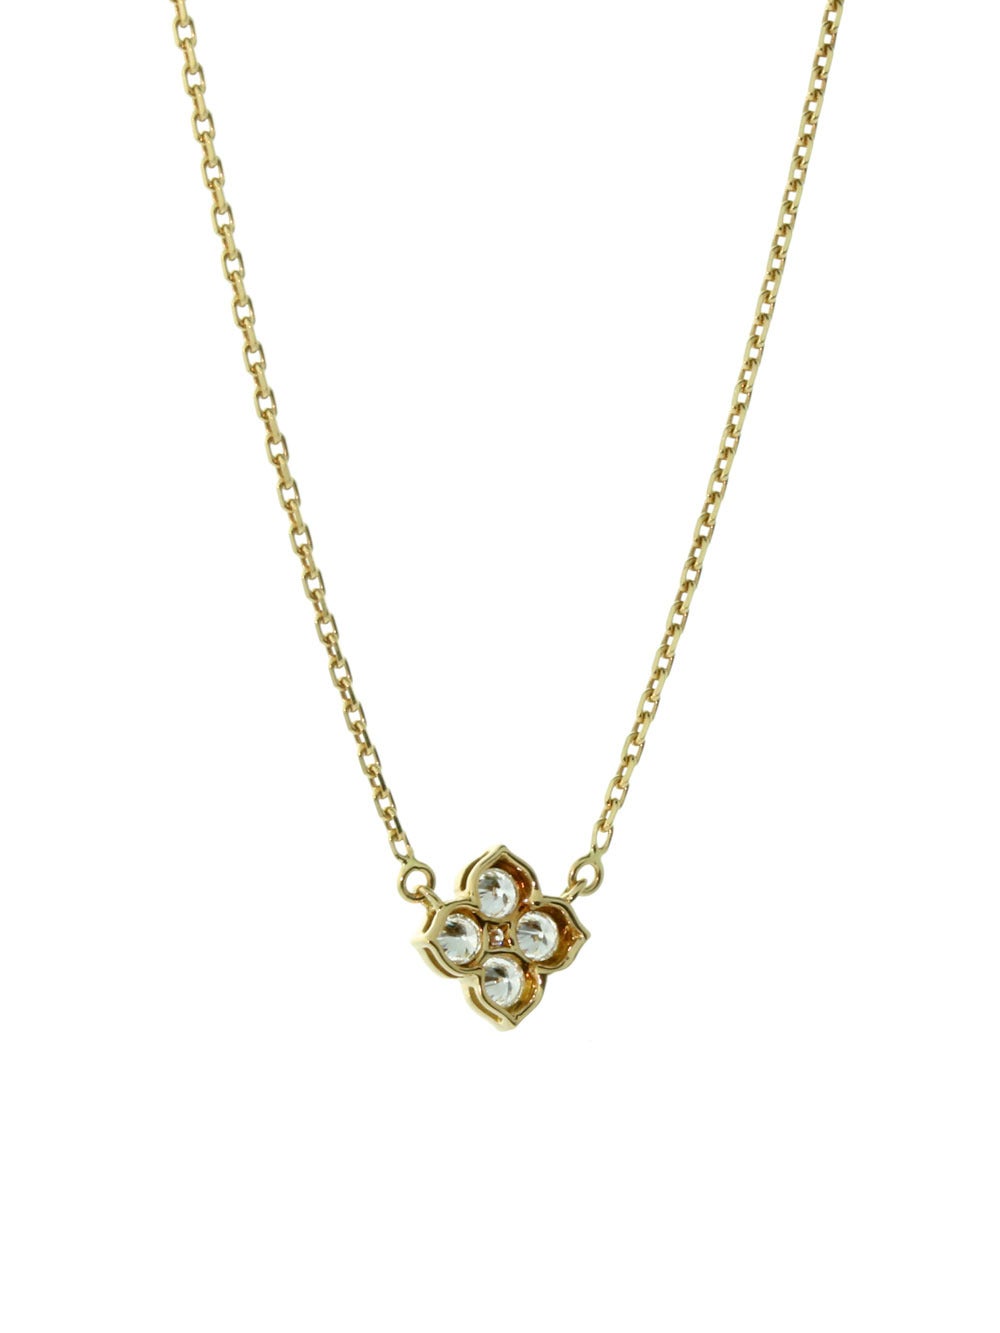 Here’s another example of why Cartier is still one of the most sought after jewelry companies on the planet. This flower necklace is made from yellow gold and has five beautiful diamonds. The timeless look and styling in the design is classic